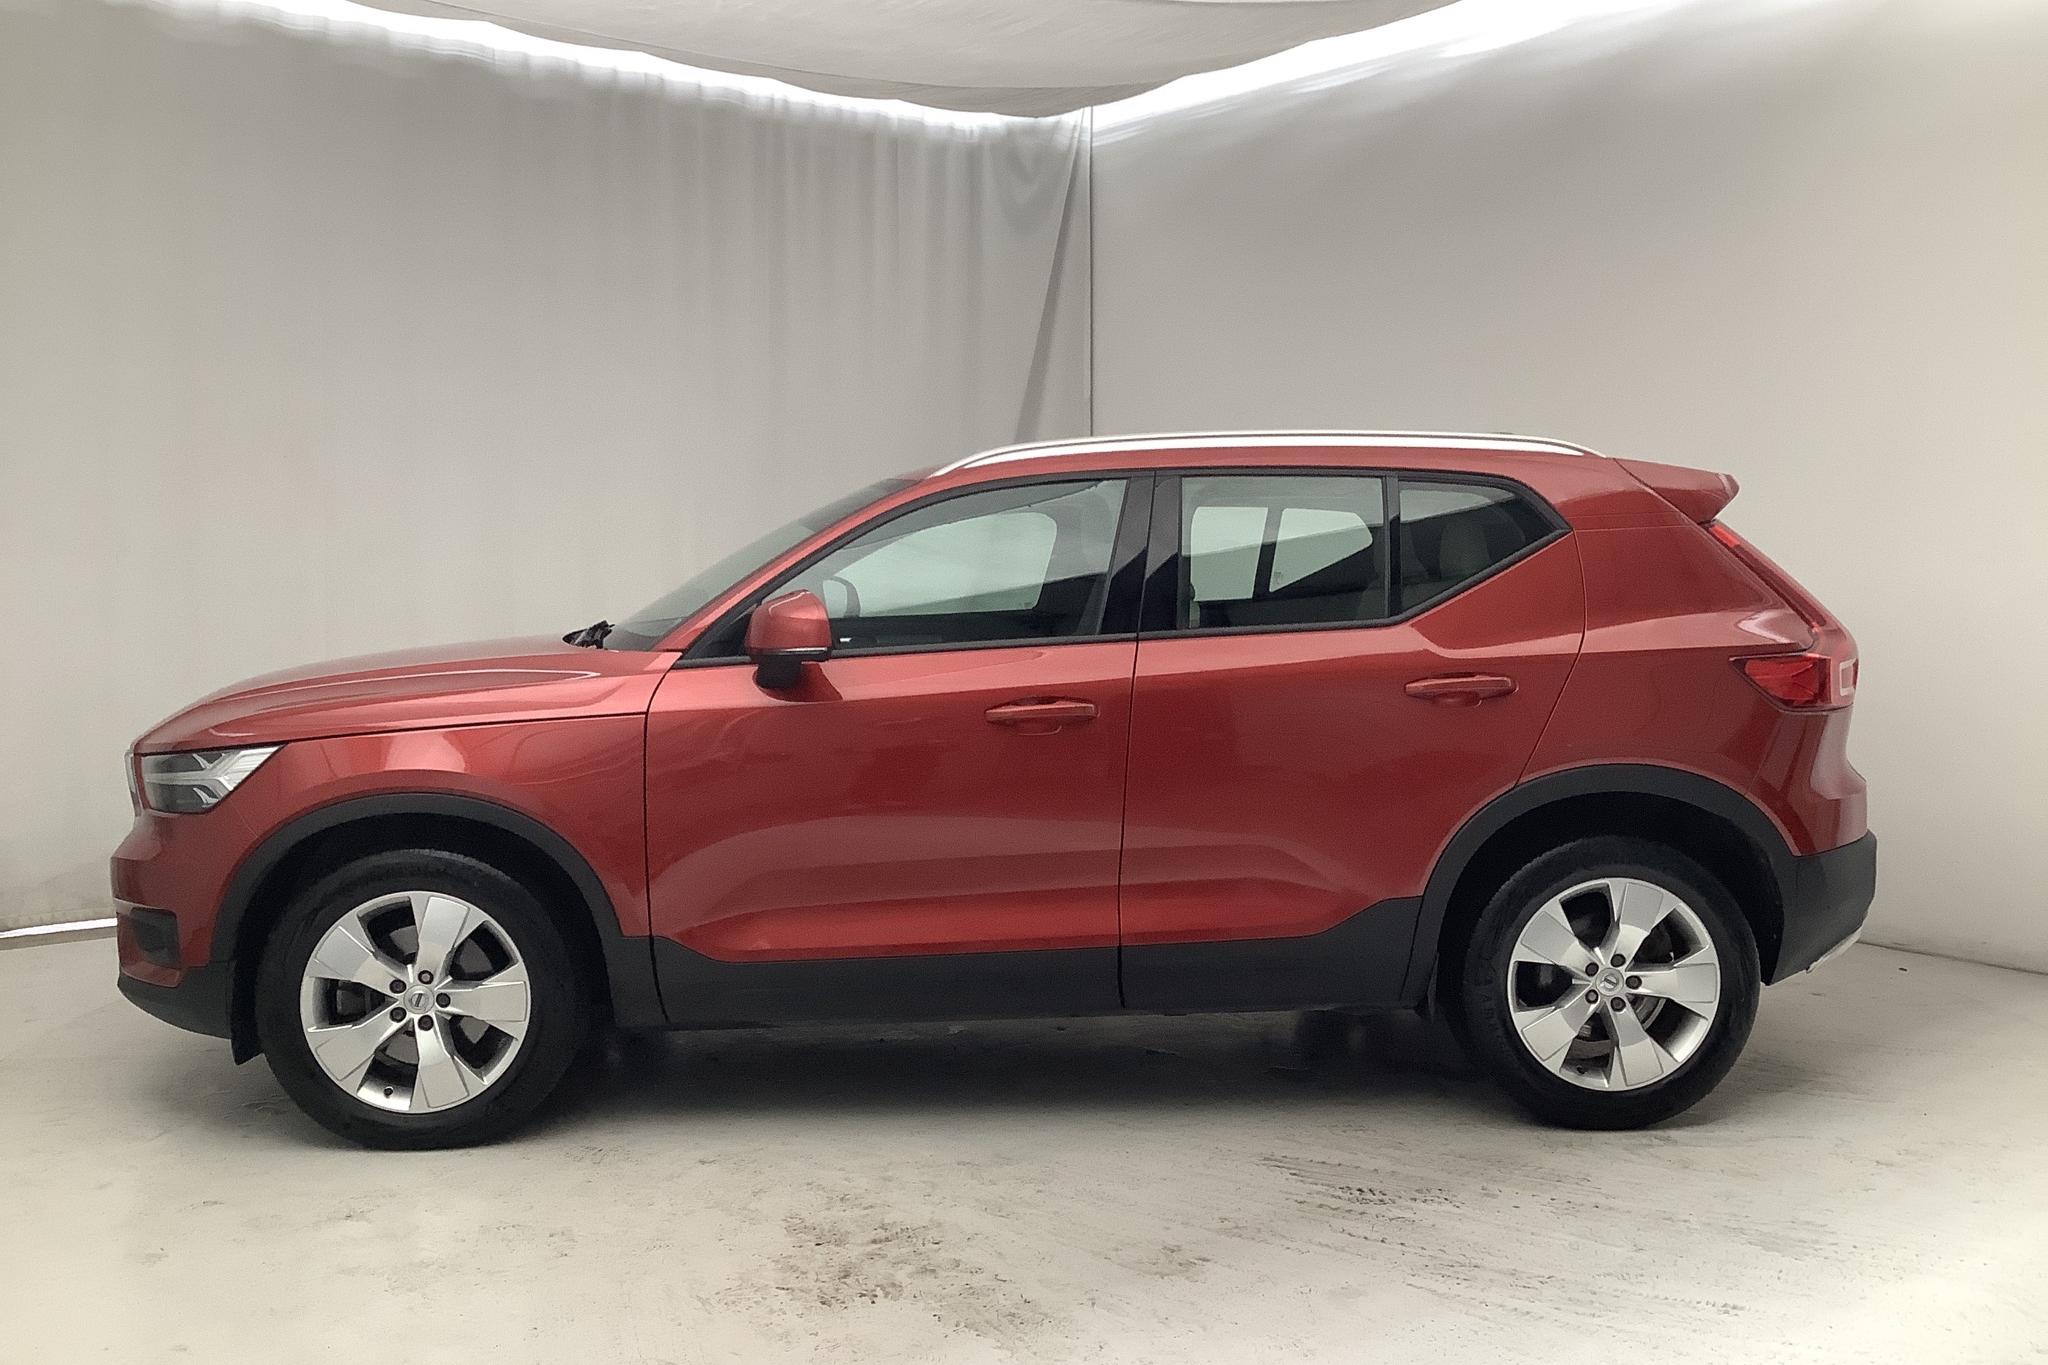 Volvo XC40 D4 AWD (190hk) - 68 680 km - Automatic - red - 2020